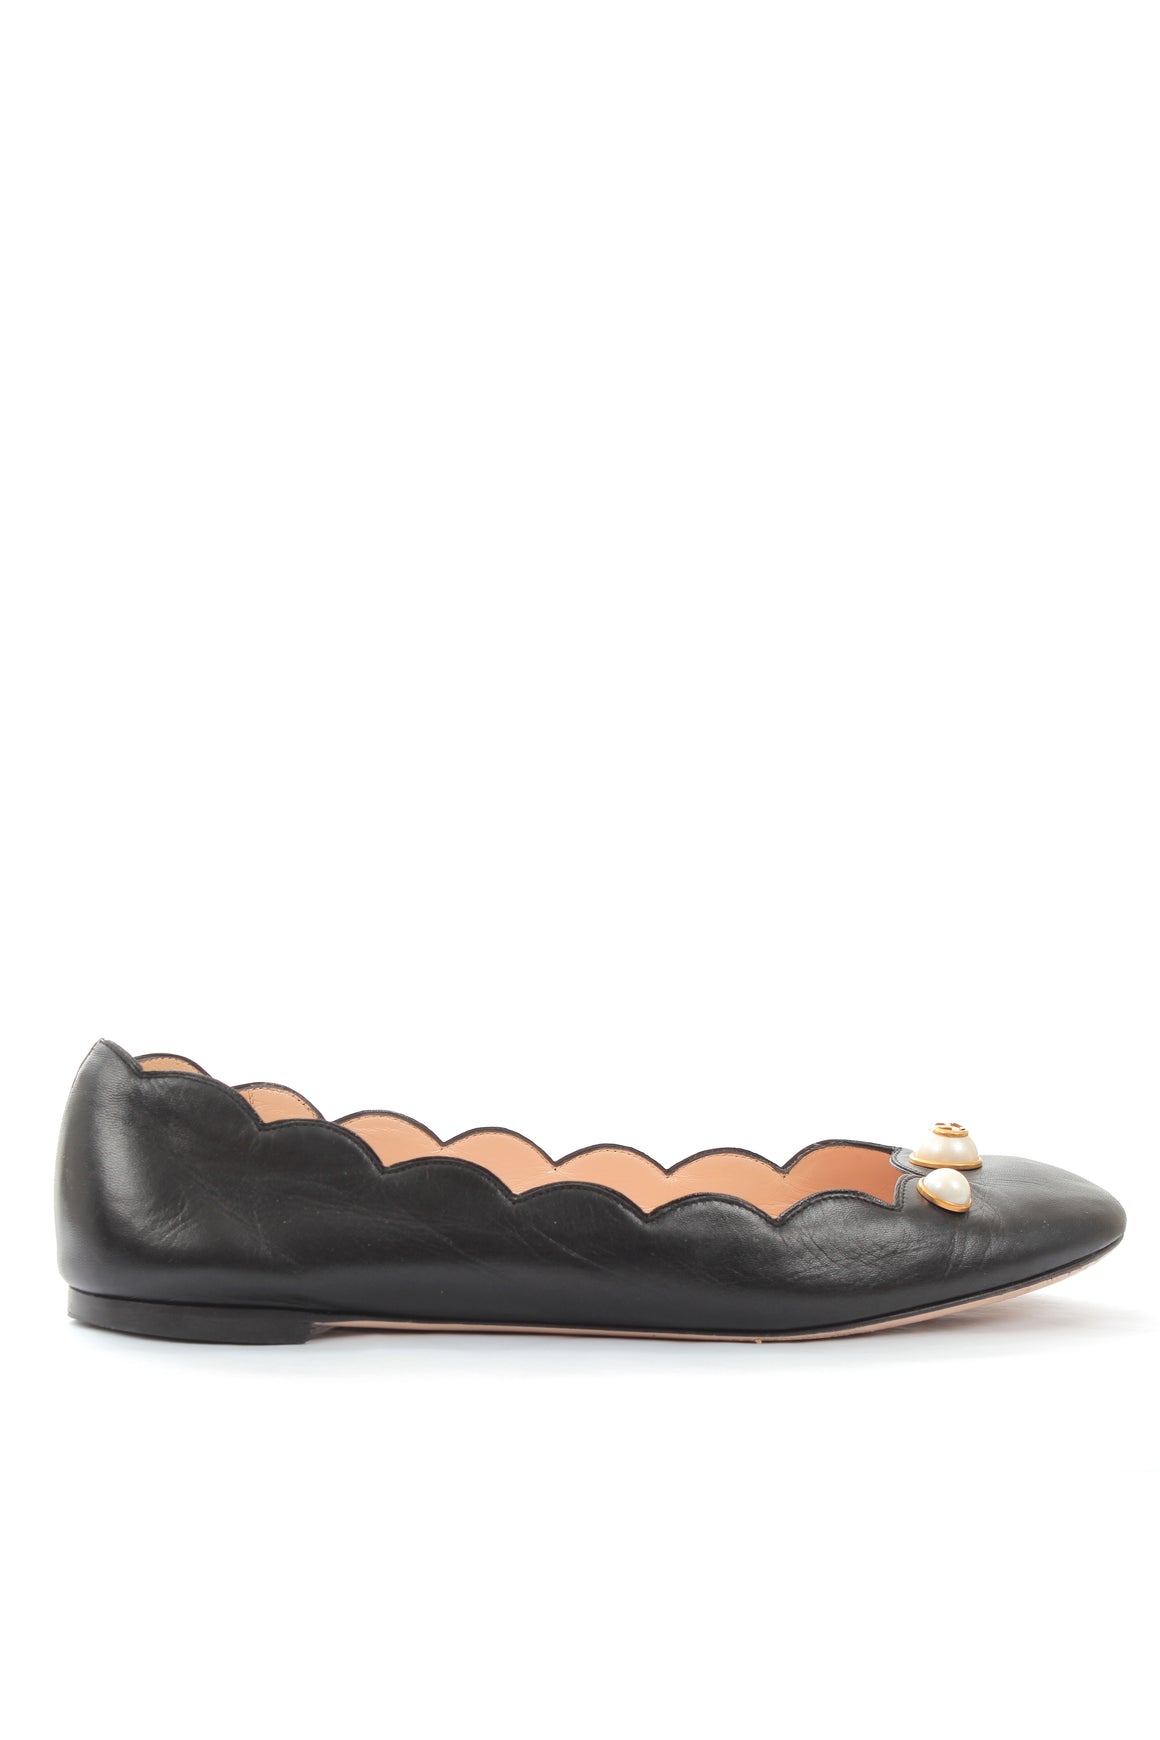 Gucci Willow Scalloped Leather Ballet Flats